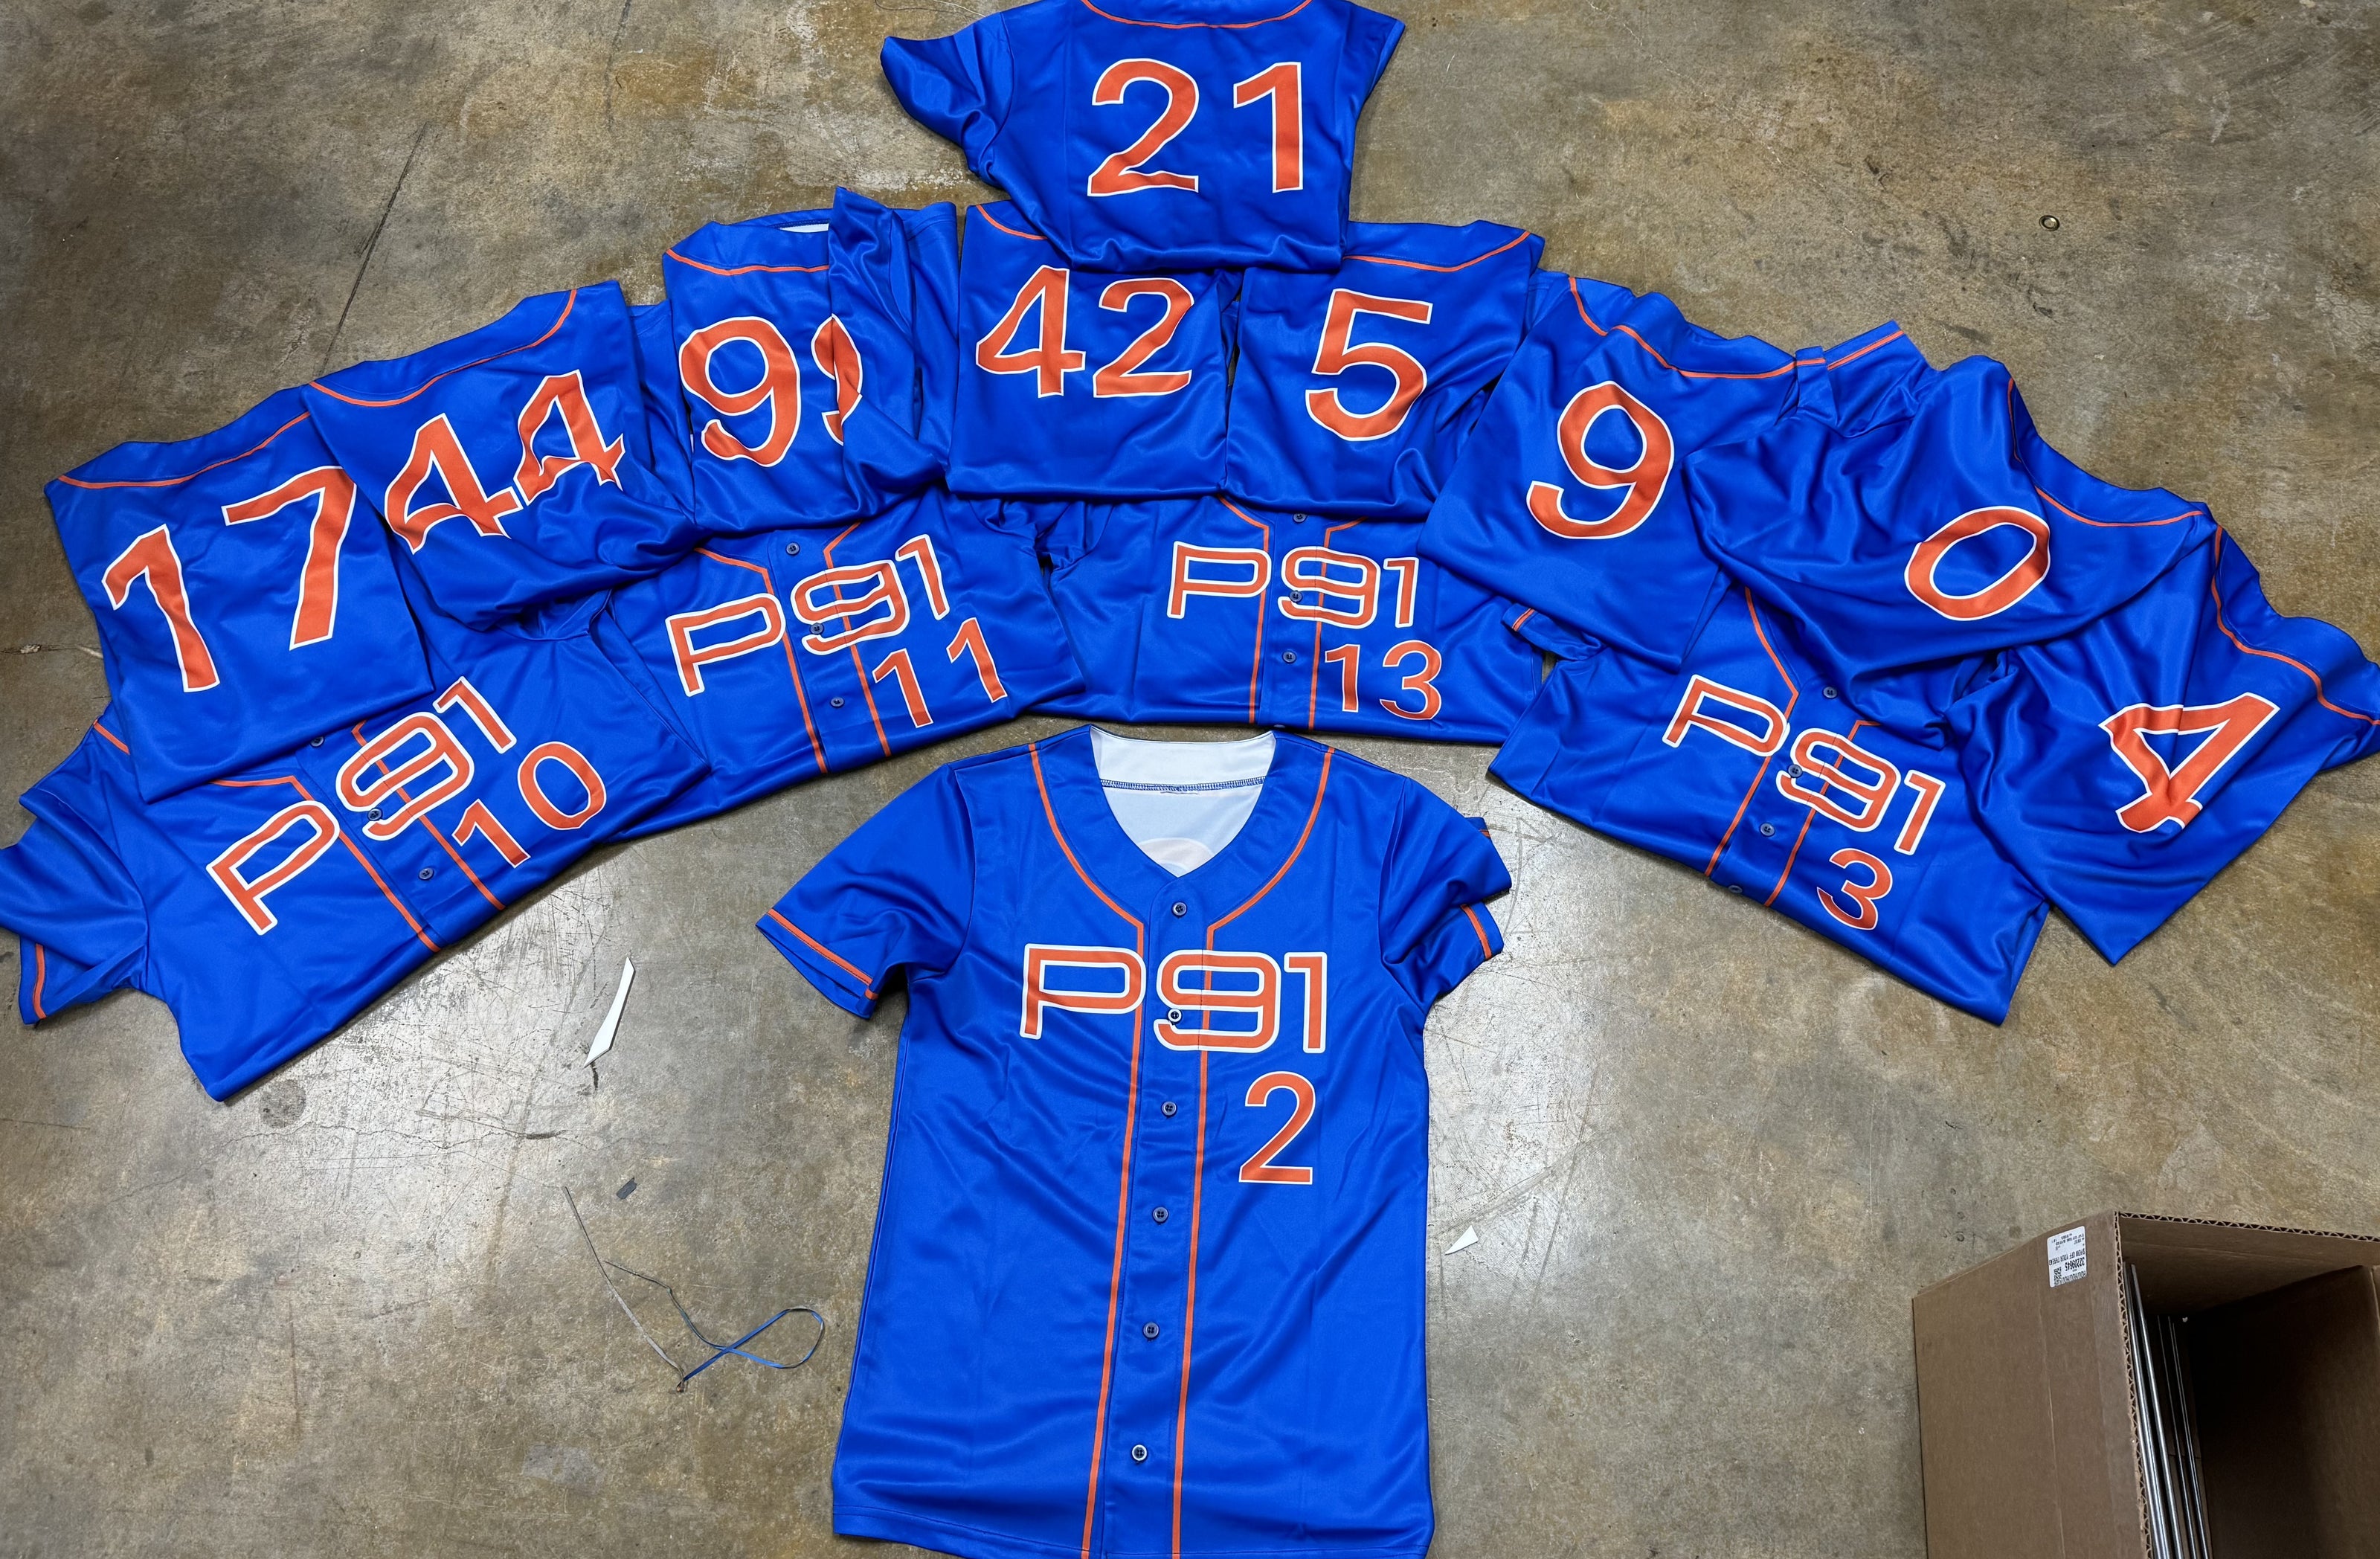 Image of a custom baseball jersey featuring vibrant, full sublimation printing, designed online, showcasing team logos and dynamic colors that resist fading and wear.